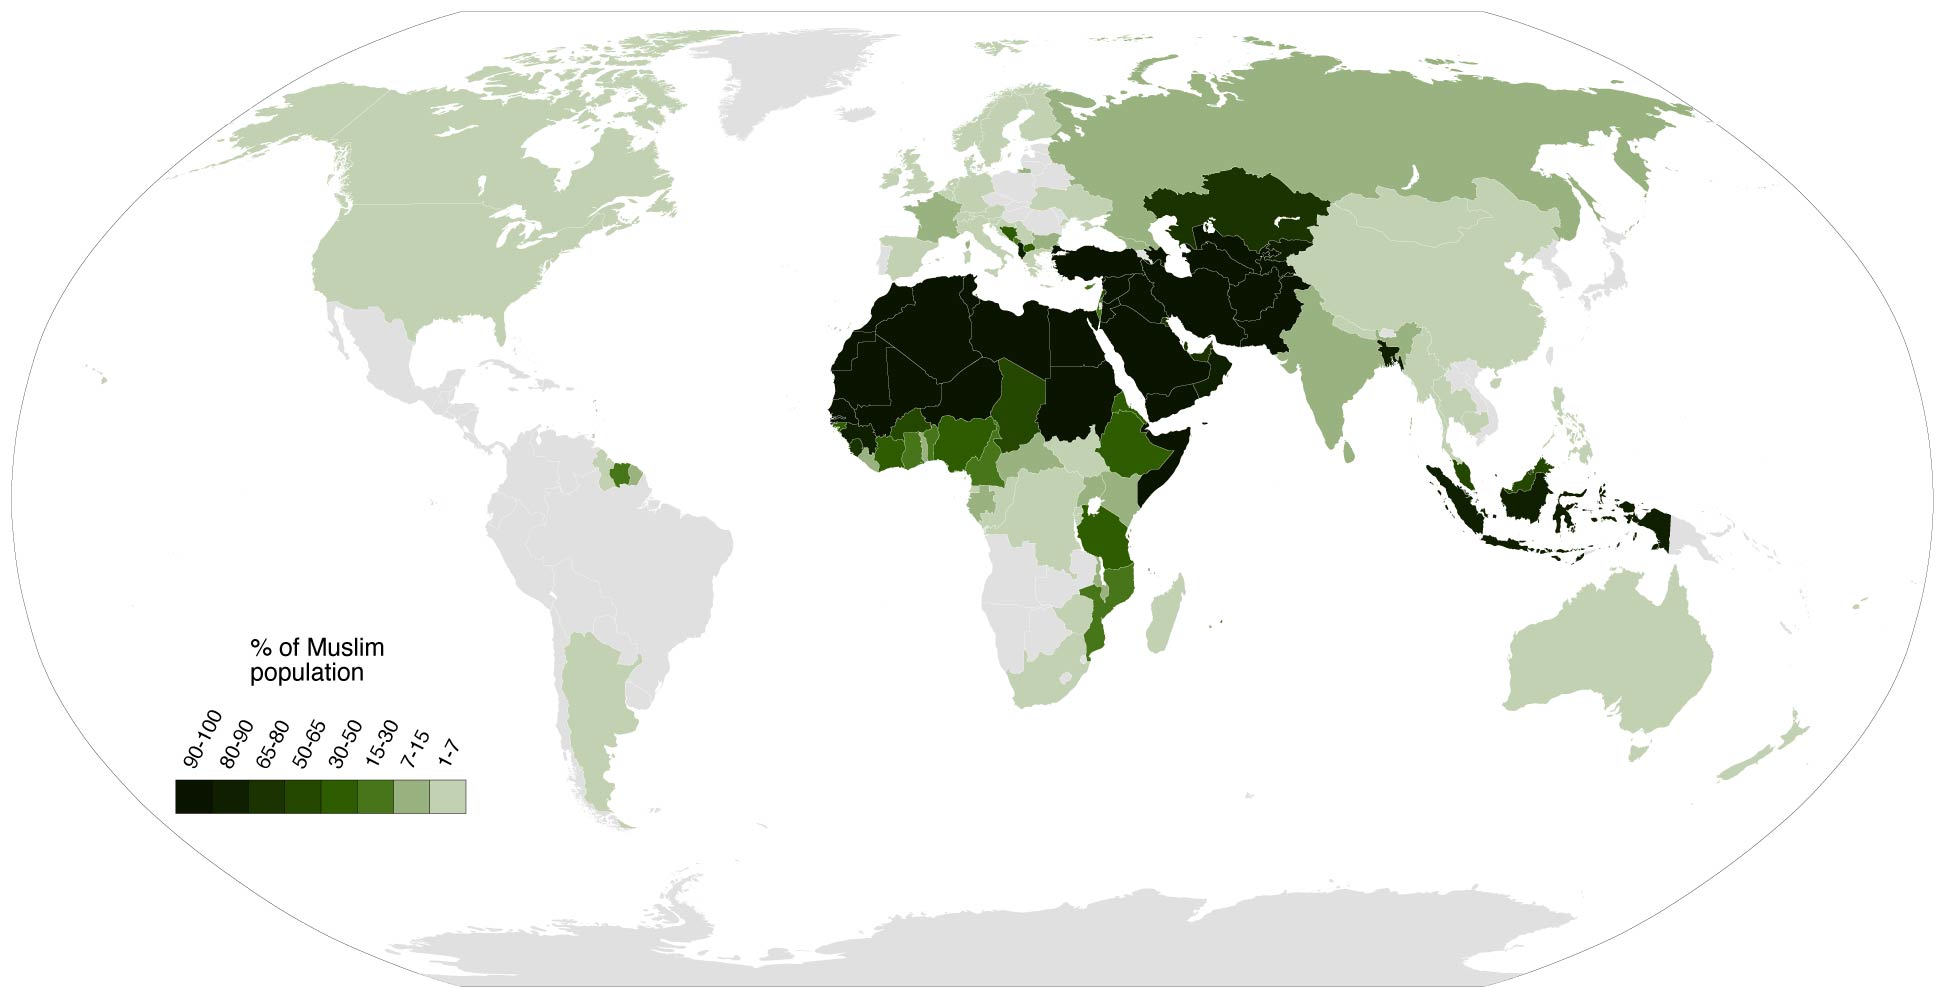 Worldmap of percentage of the Muslim population in each country